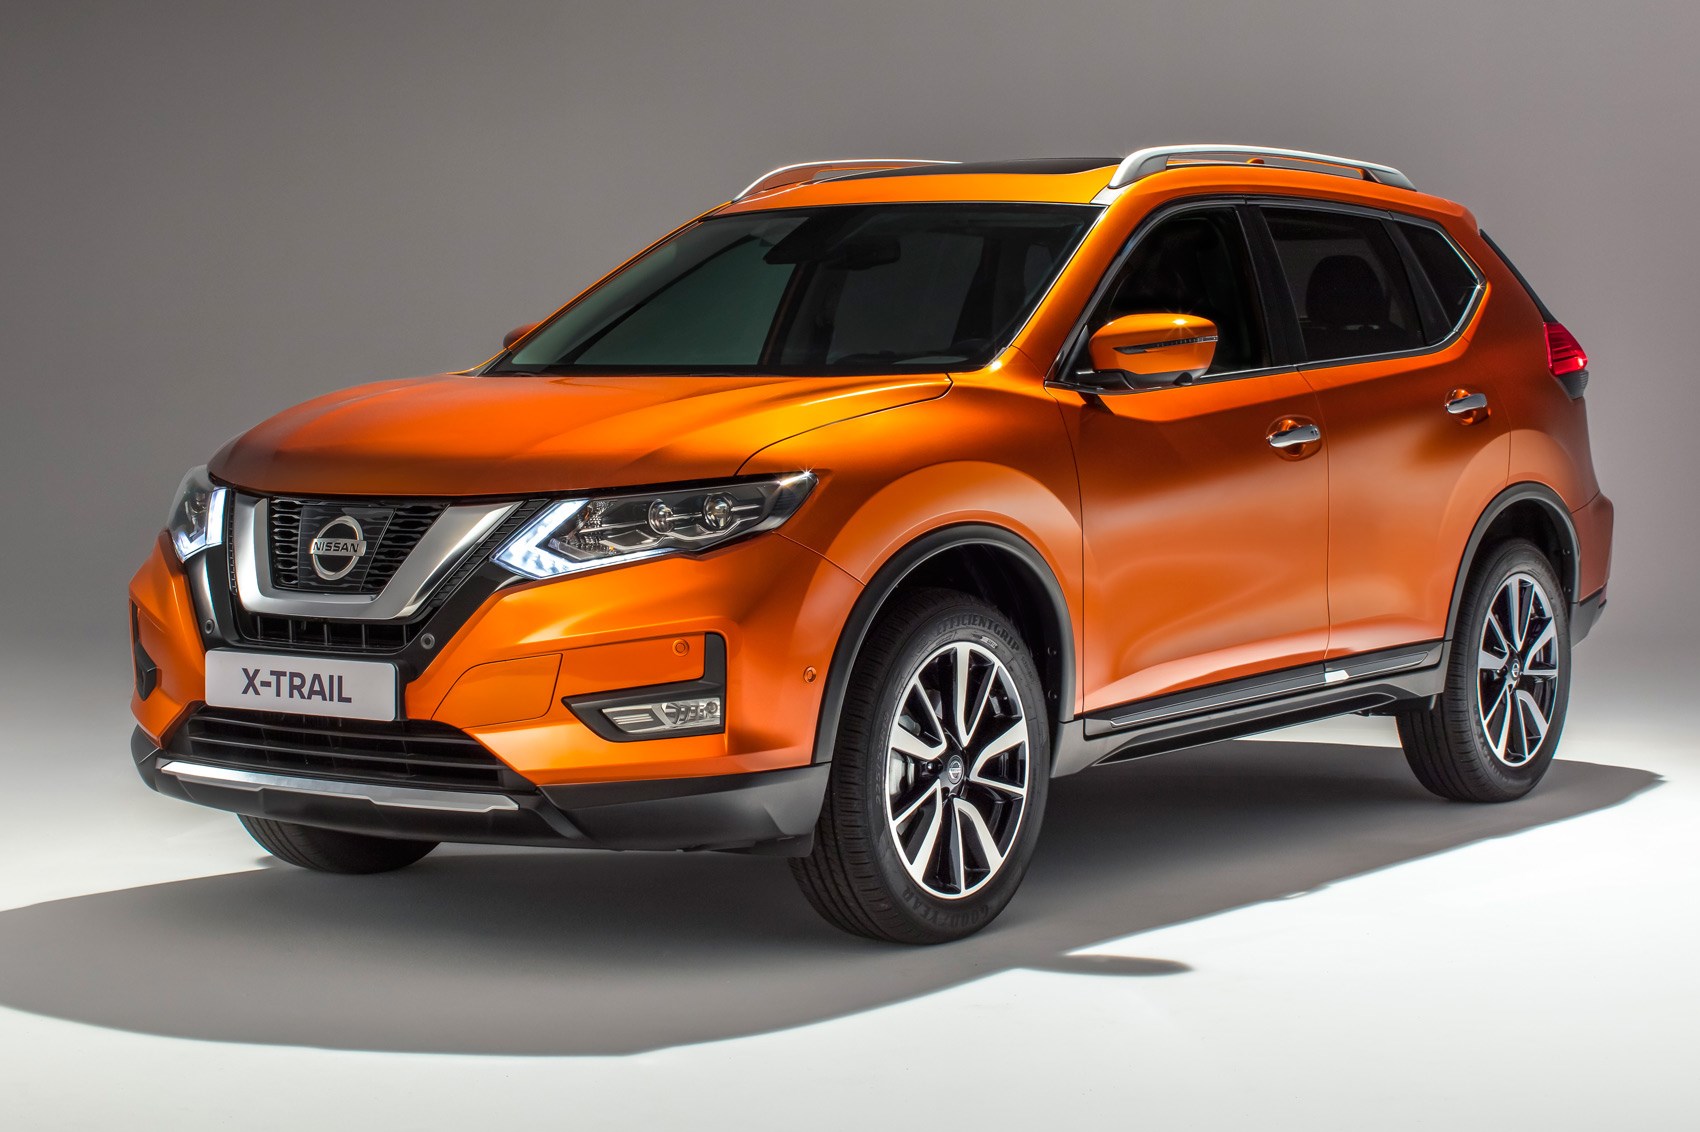 Nissan X-Trail (2017) facelift: pictures, specs and details | CAR Magazine